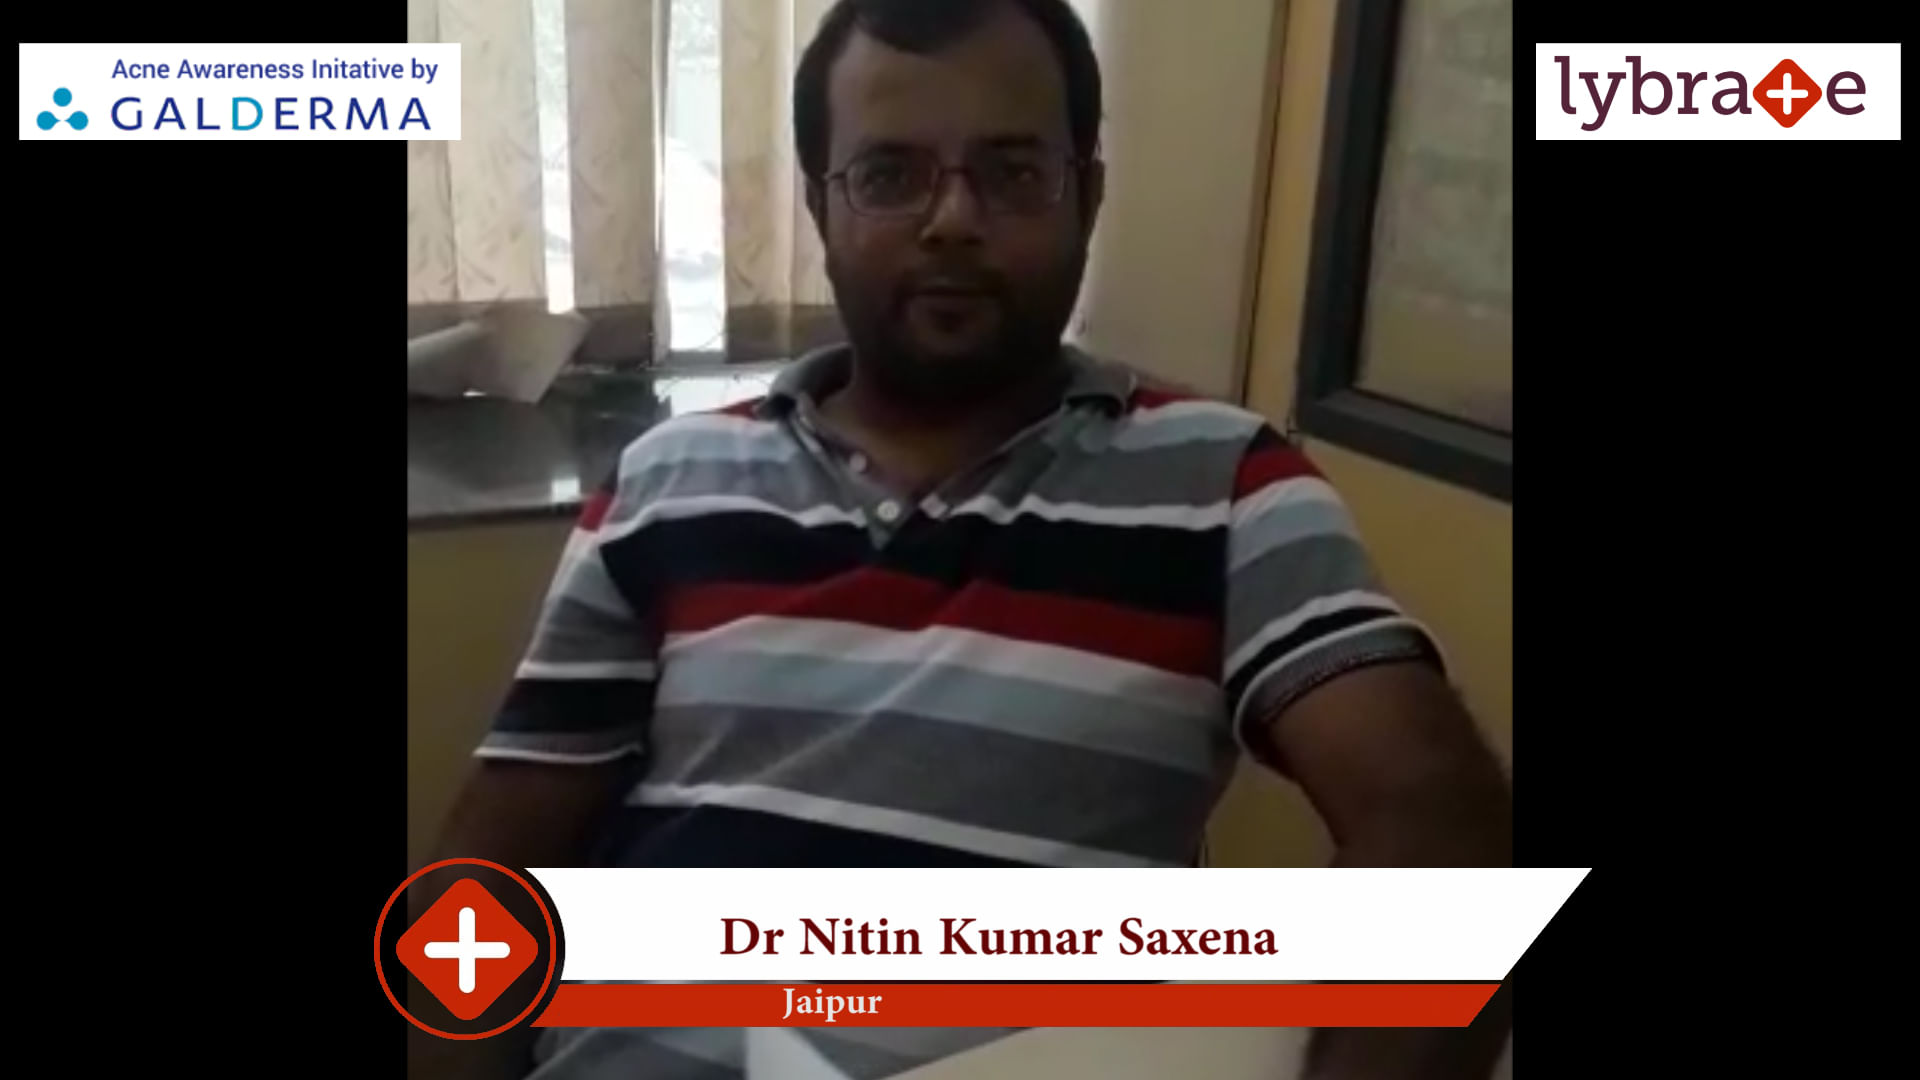 Lybrate | Dr. Nitin Kumar Saxena speaks on IMPORTANCE OF TREATING ACNE EARLY